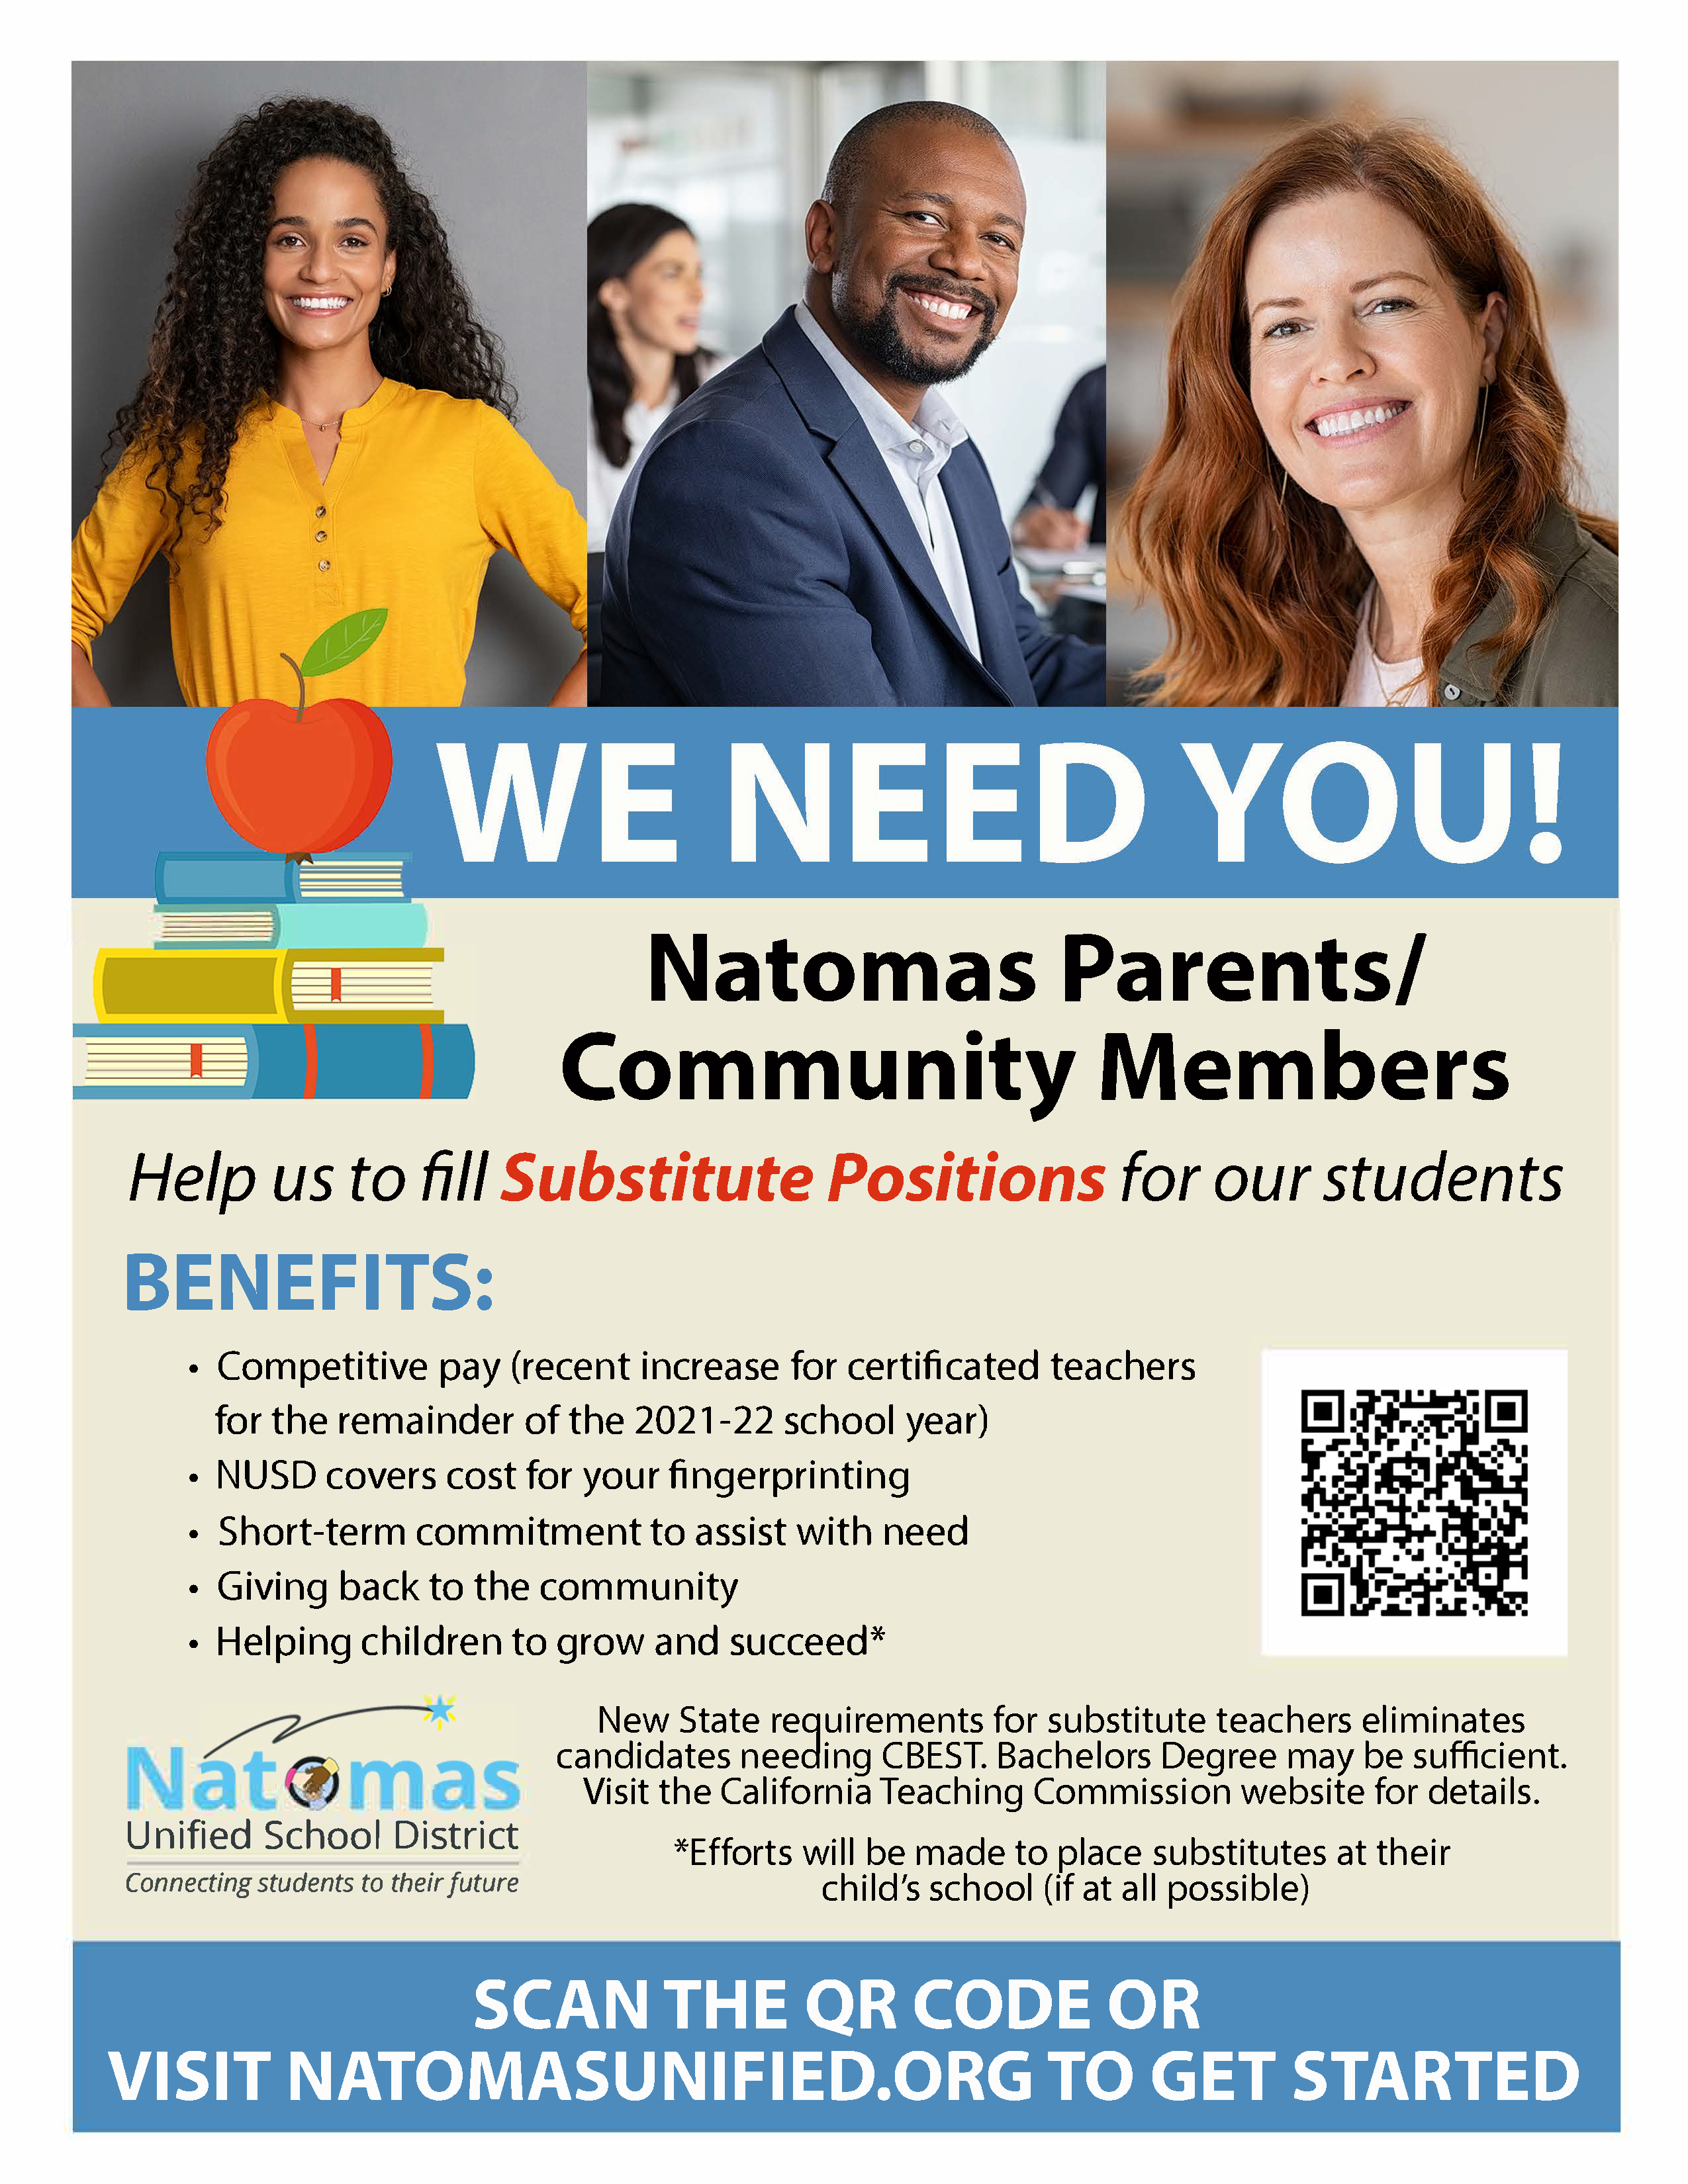 We need you! Natomas parents and community members